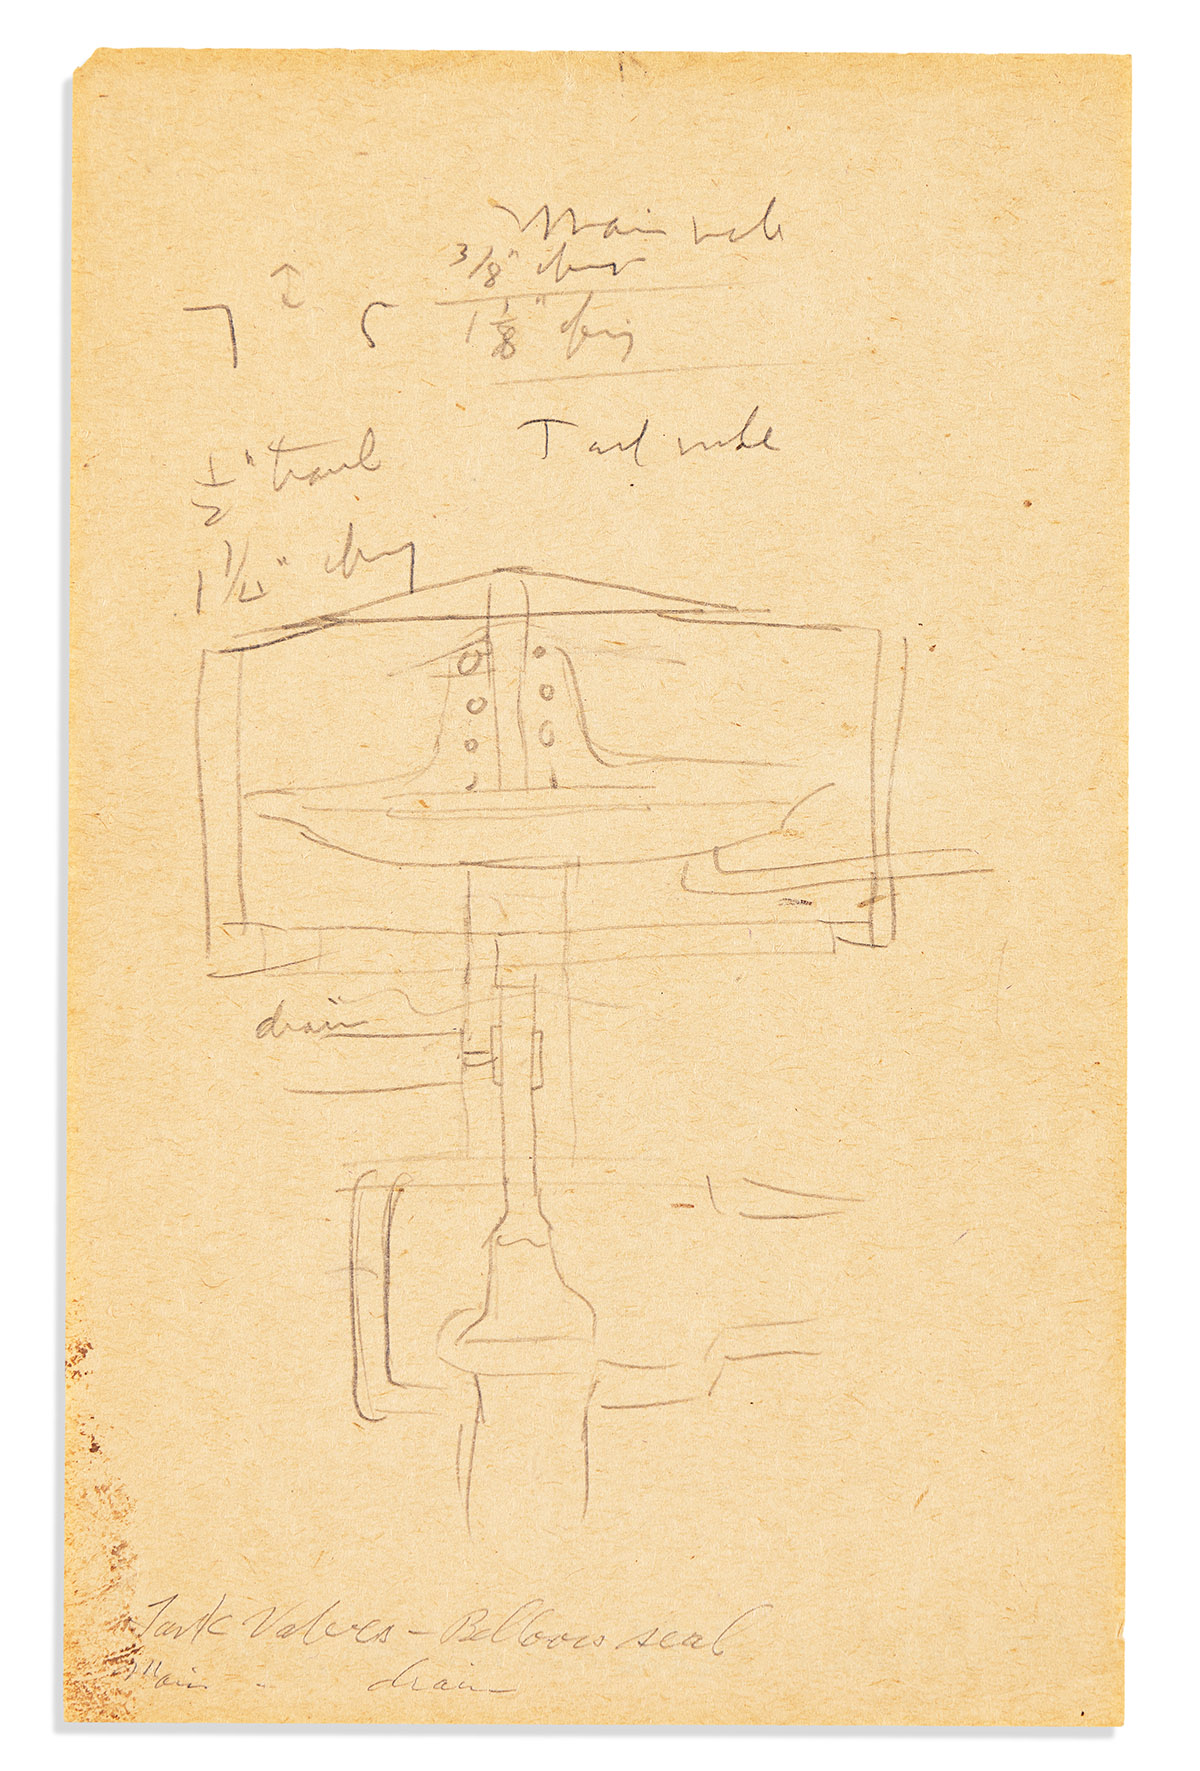 (SCIENTISTS.) GODDARD, ROBERT H. Two graphite drawings, unsigned, each a diagram showing a rocket valve design, with title and notes in